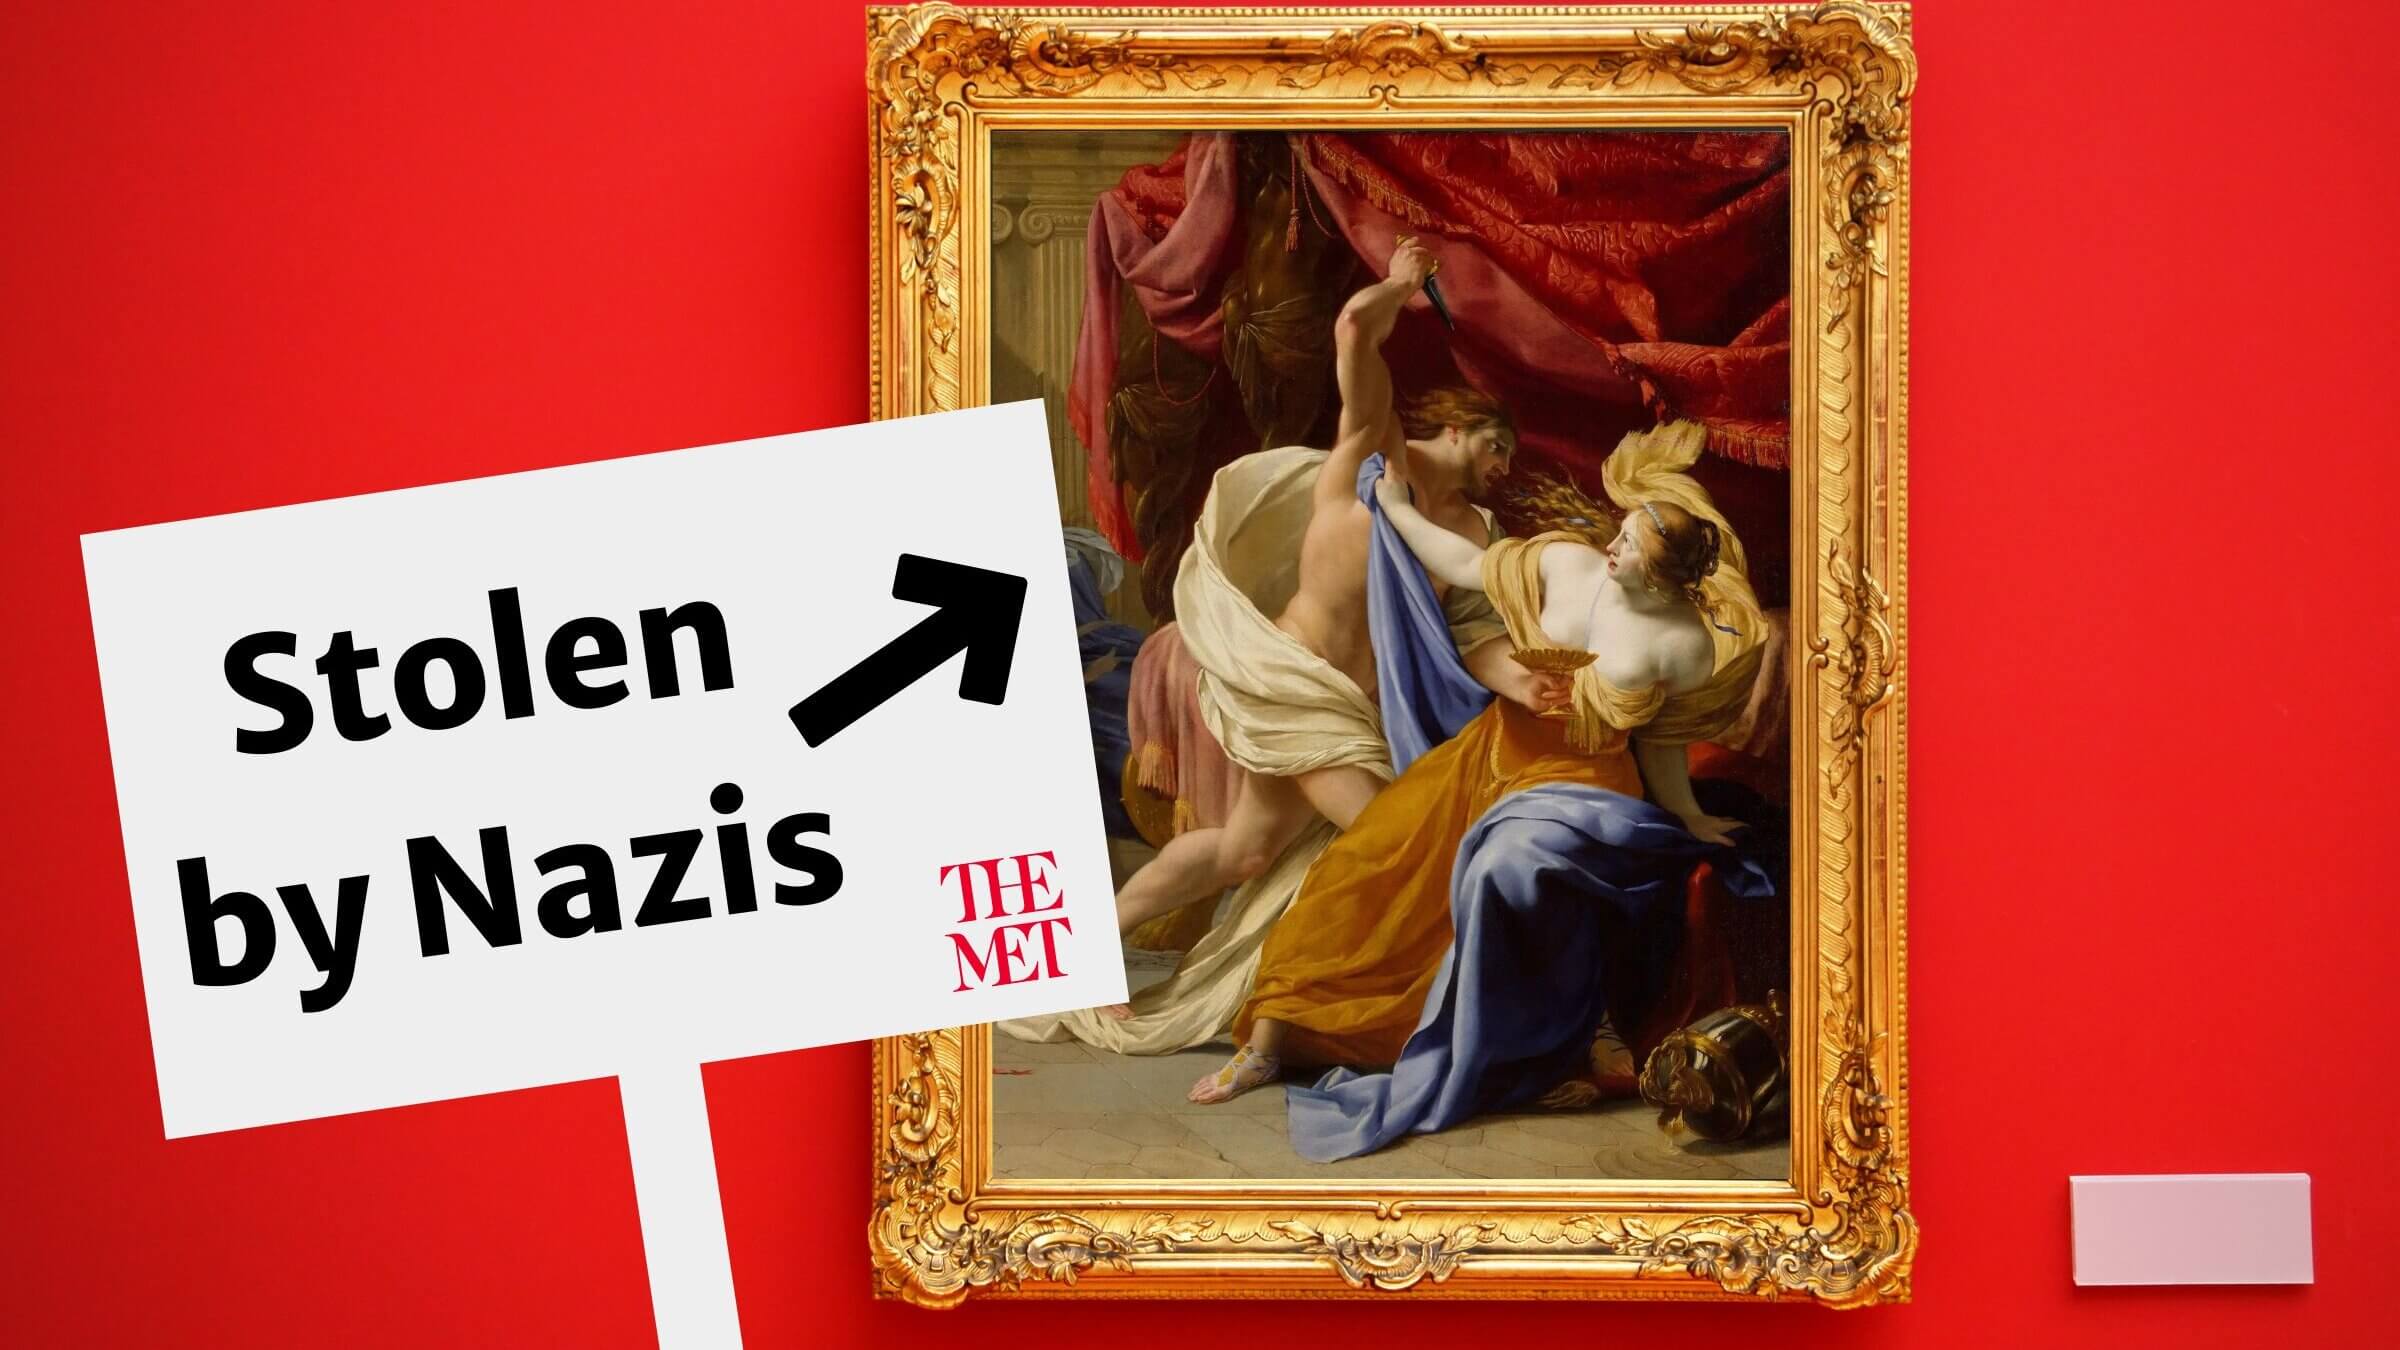 Painting hanging in a gallery, with Met-branded sign in front of it reading "Stolen by Nazis"